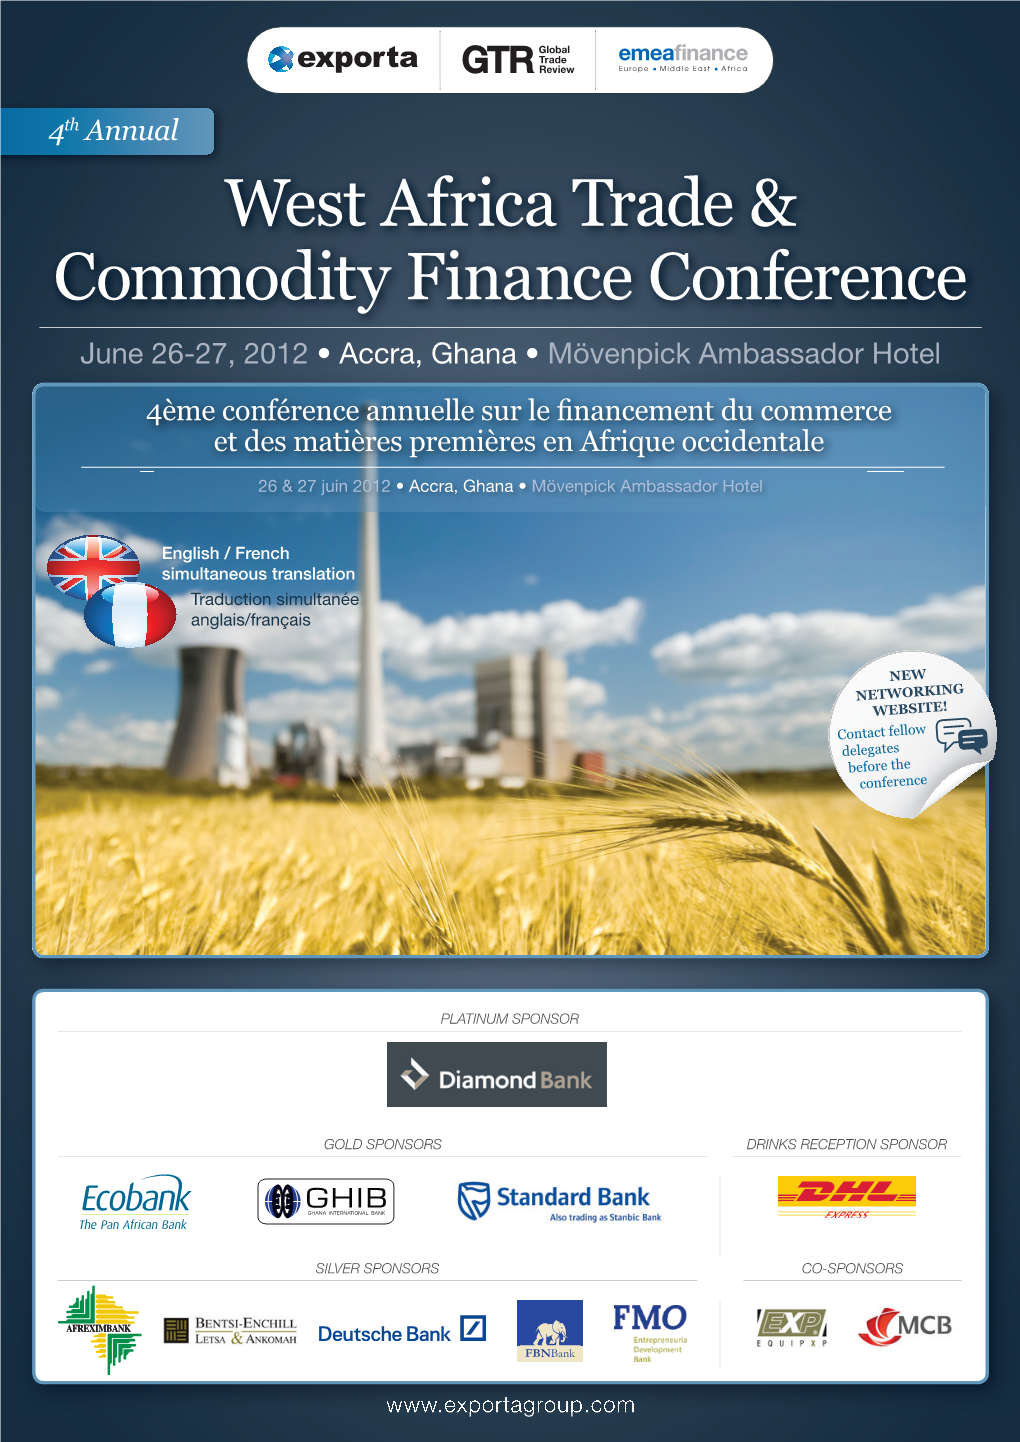 West Africa Trade & Commodity Finance Conference